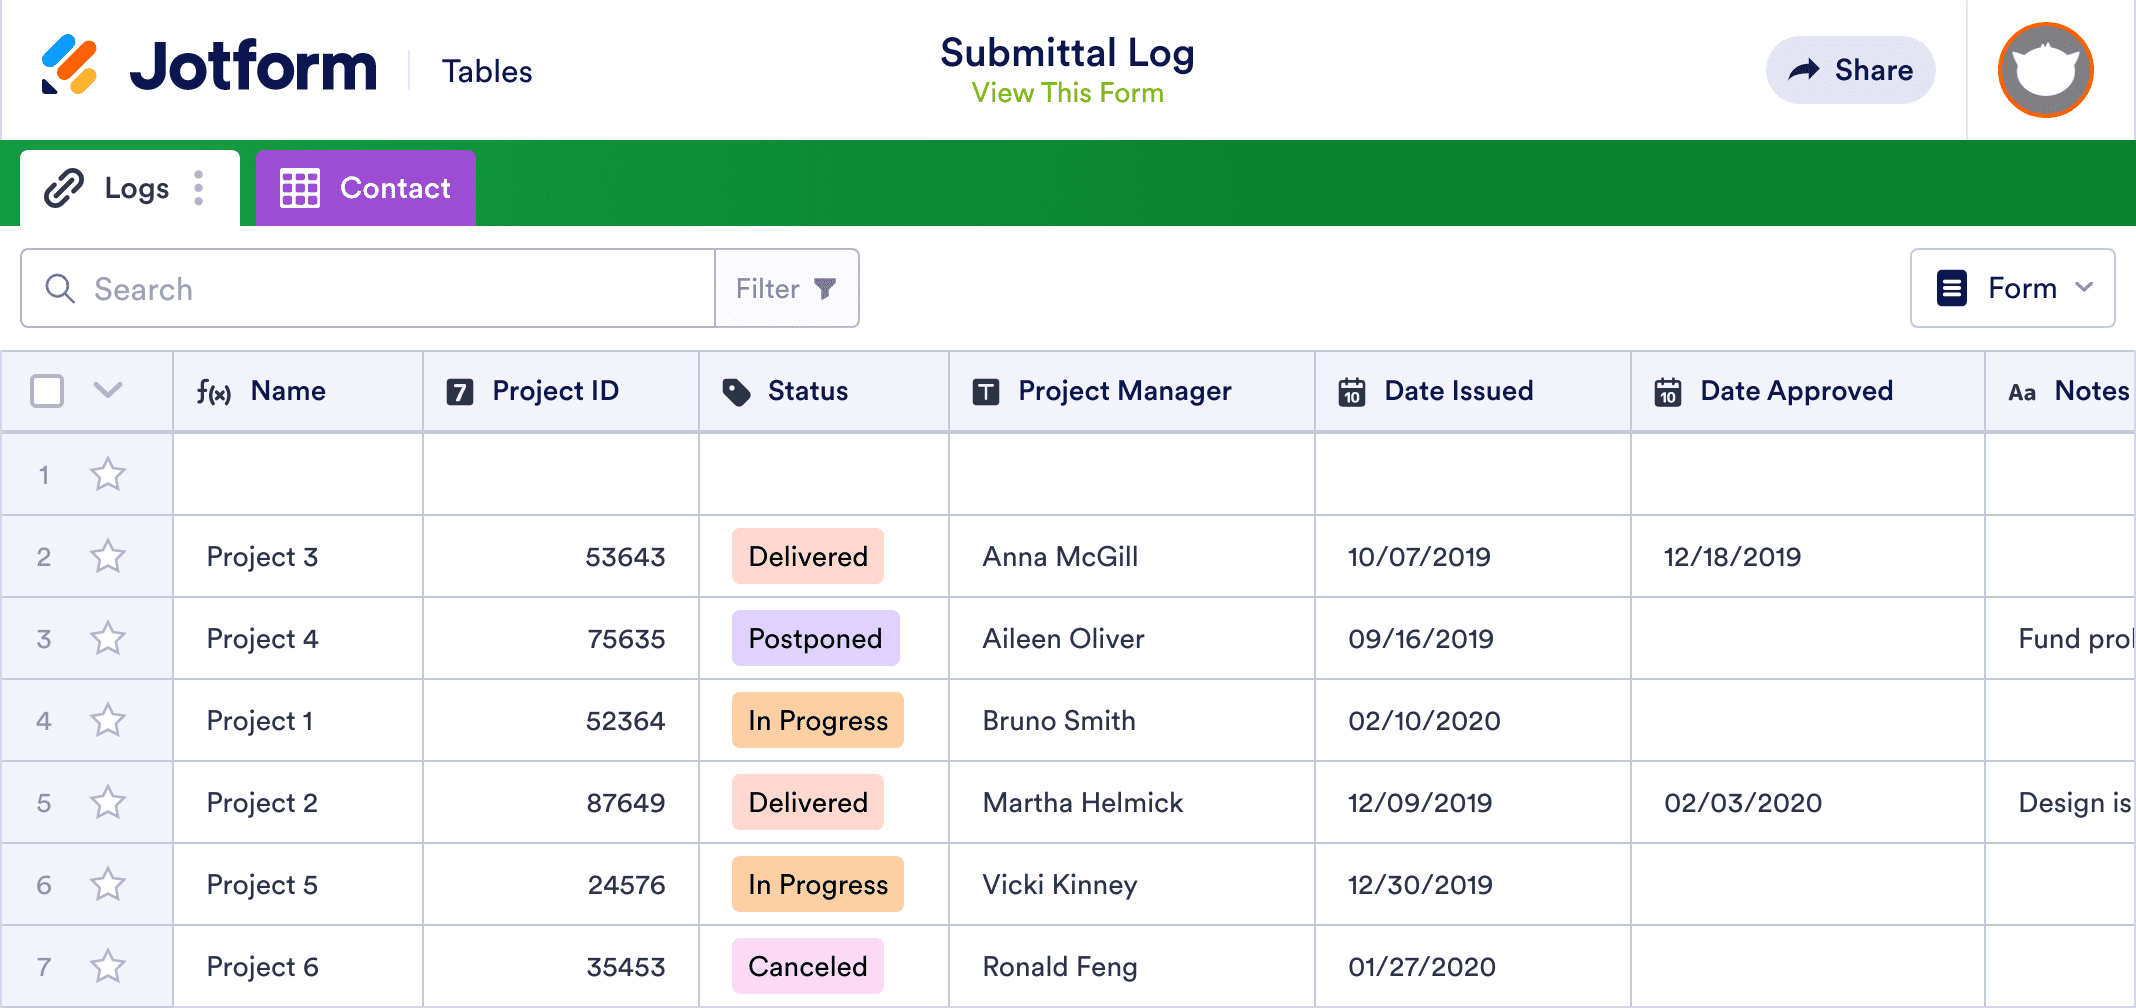 Submittal Log Template Jotform Tables